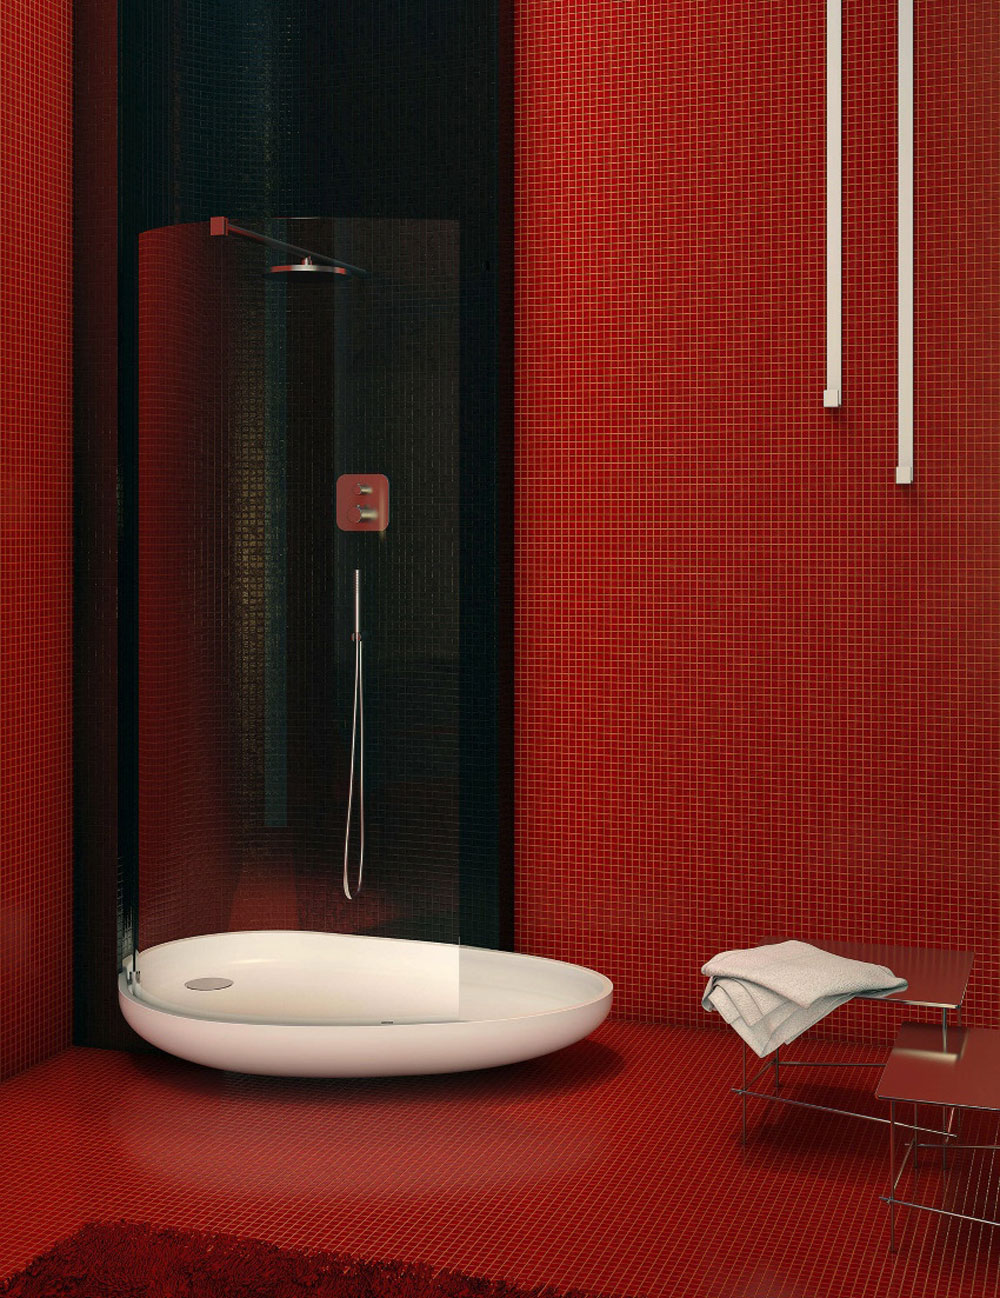 Add-warmth-to-your-house-with-ideas-of-these-red-bathroom-interiors-8, add-warmth-to-your-house-with-ideas-of-these-red-bathroom-interiors